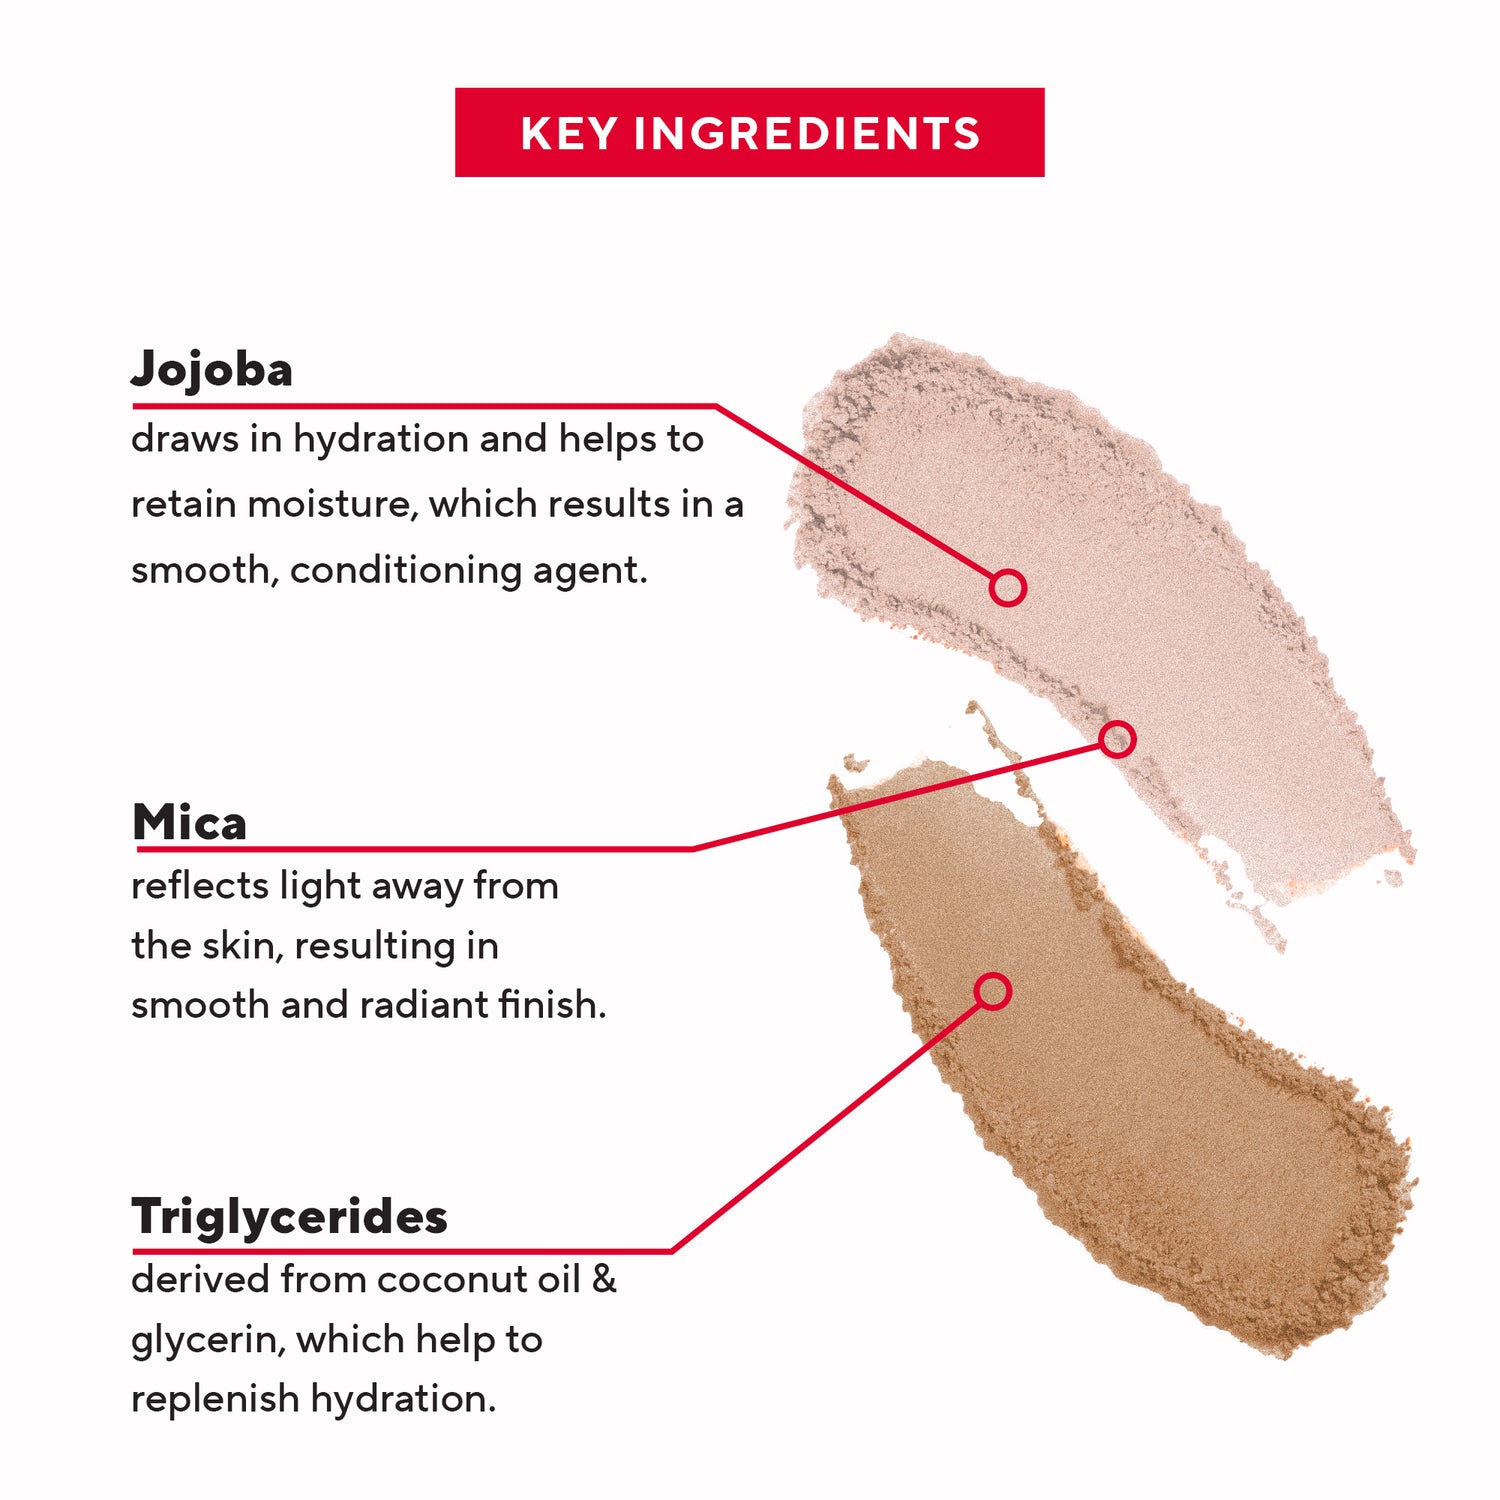 KEY INGREDIENTS MIRABELLA SCULPT DUO FOR BRONZING, HIGHLIGHT AND CONTOUR